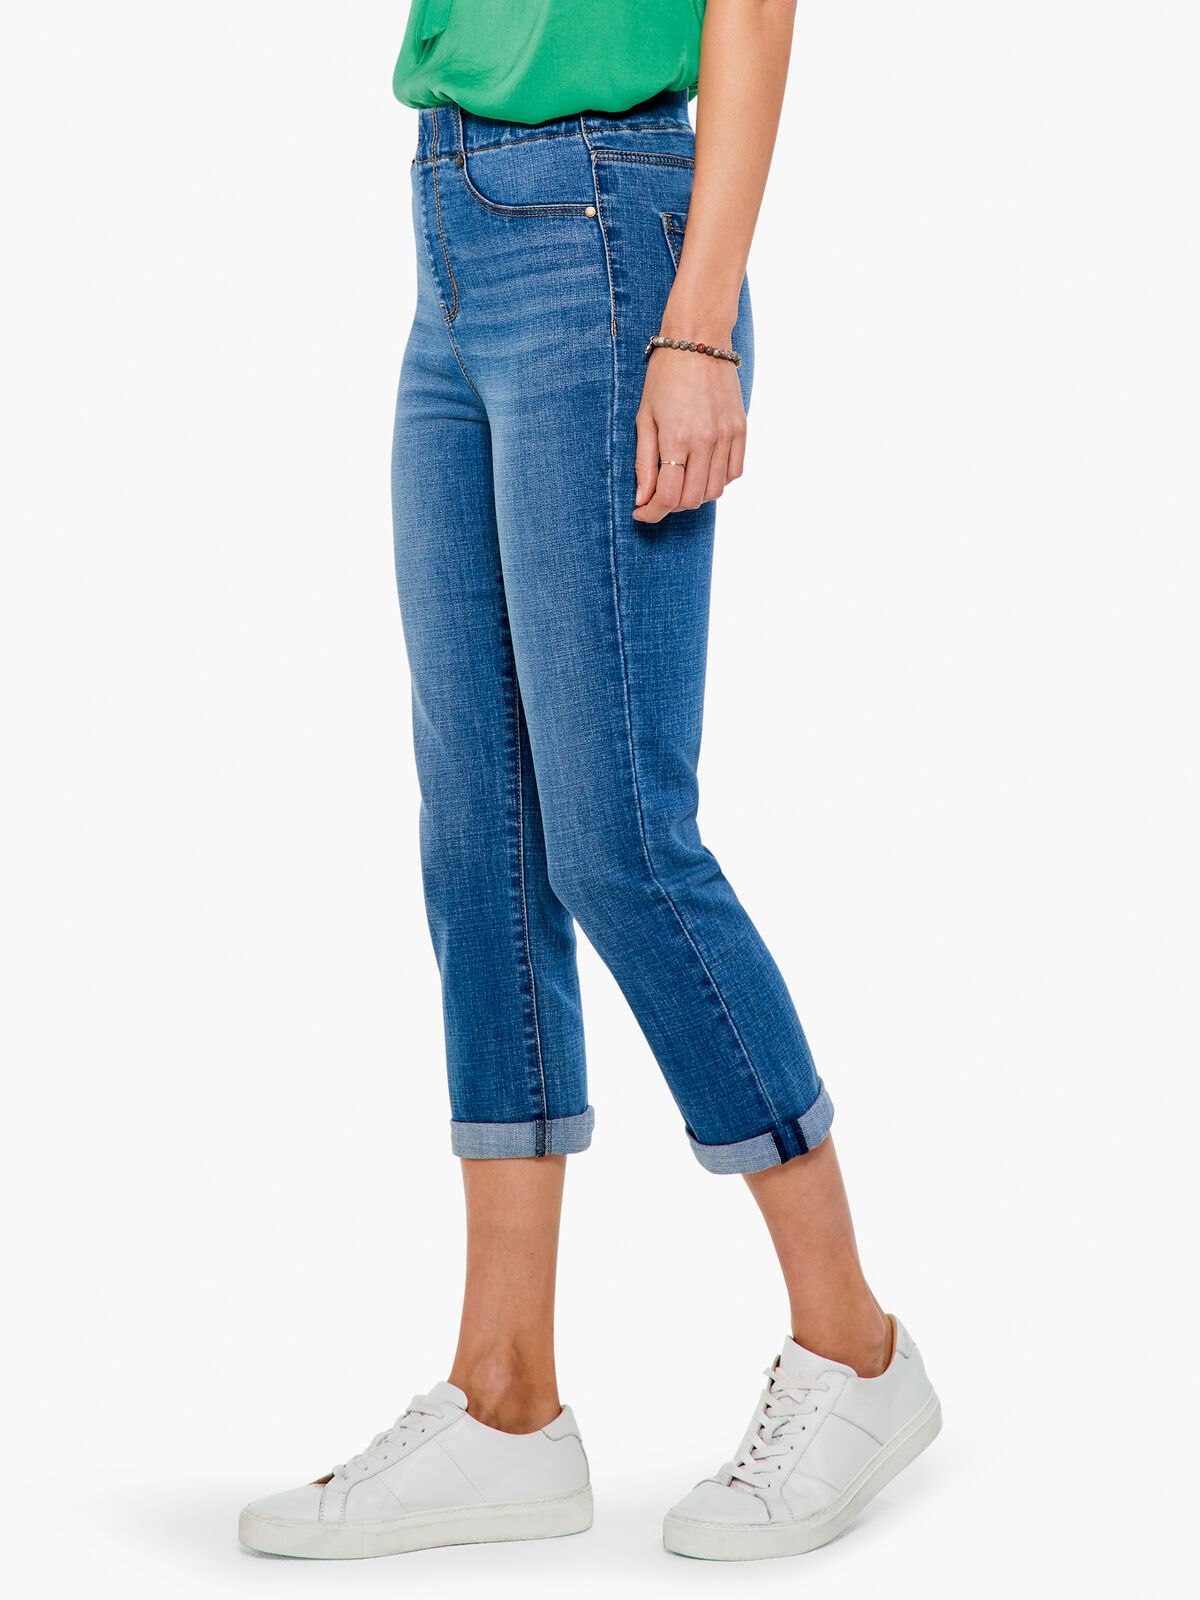 Liverpool Chloe Crop Skinny Jean with Rolled Cuff